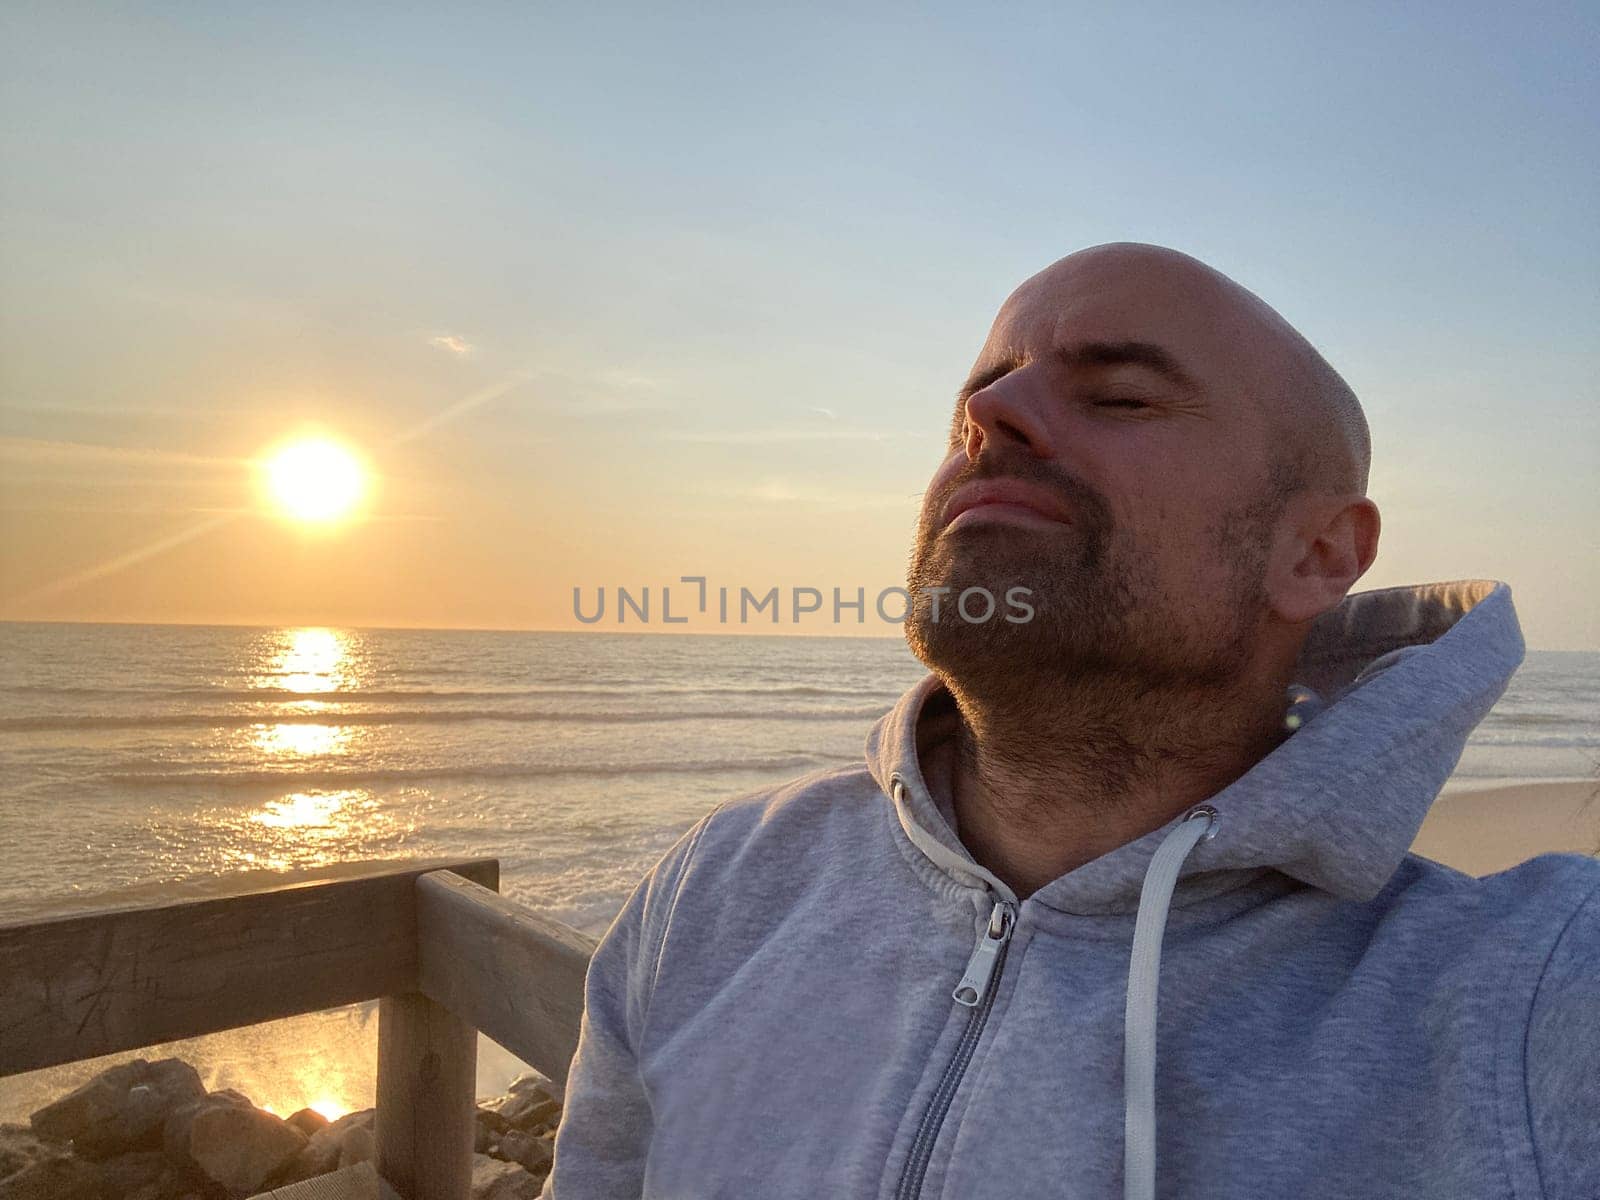 Profile of a of man breathing deep fresh air at sunset by papatonic